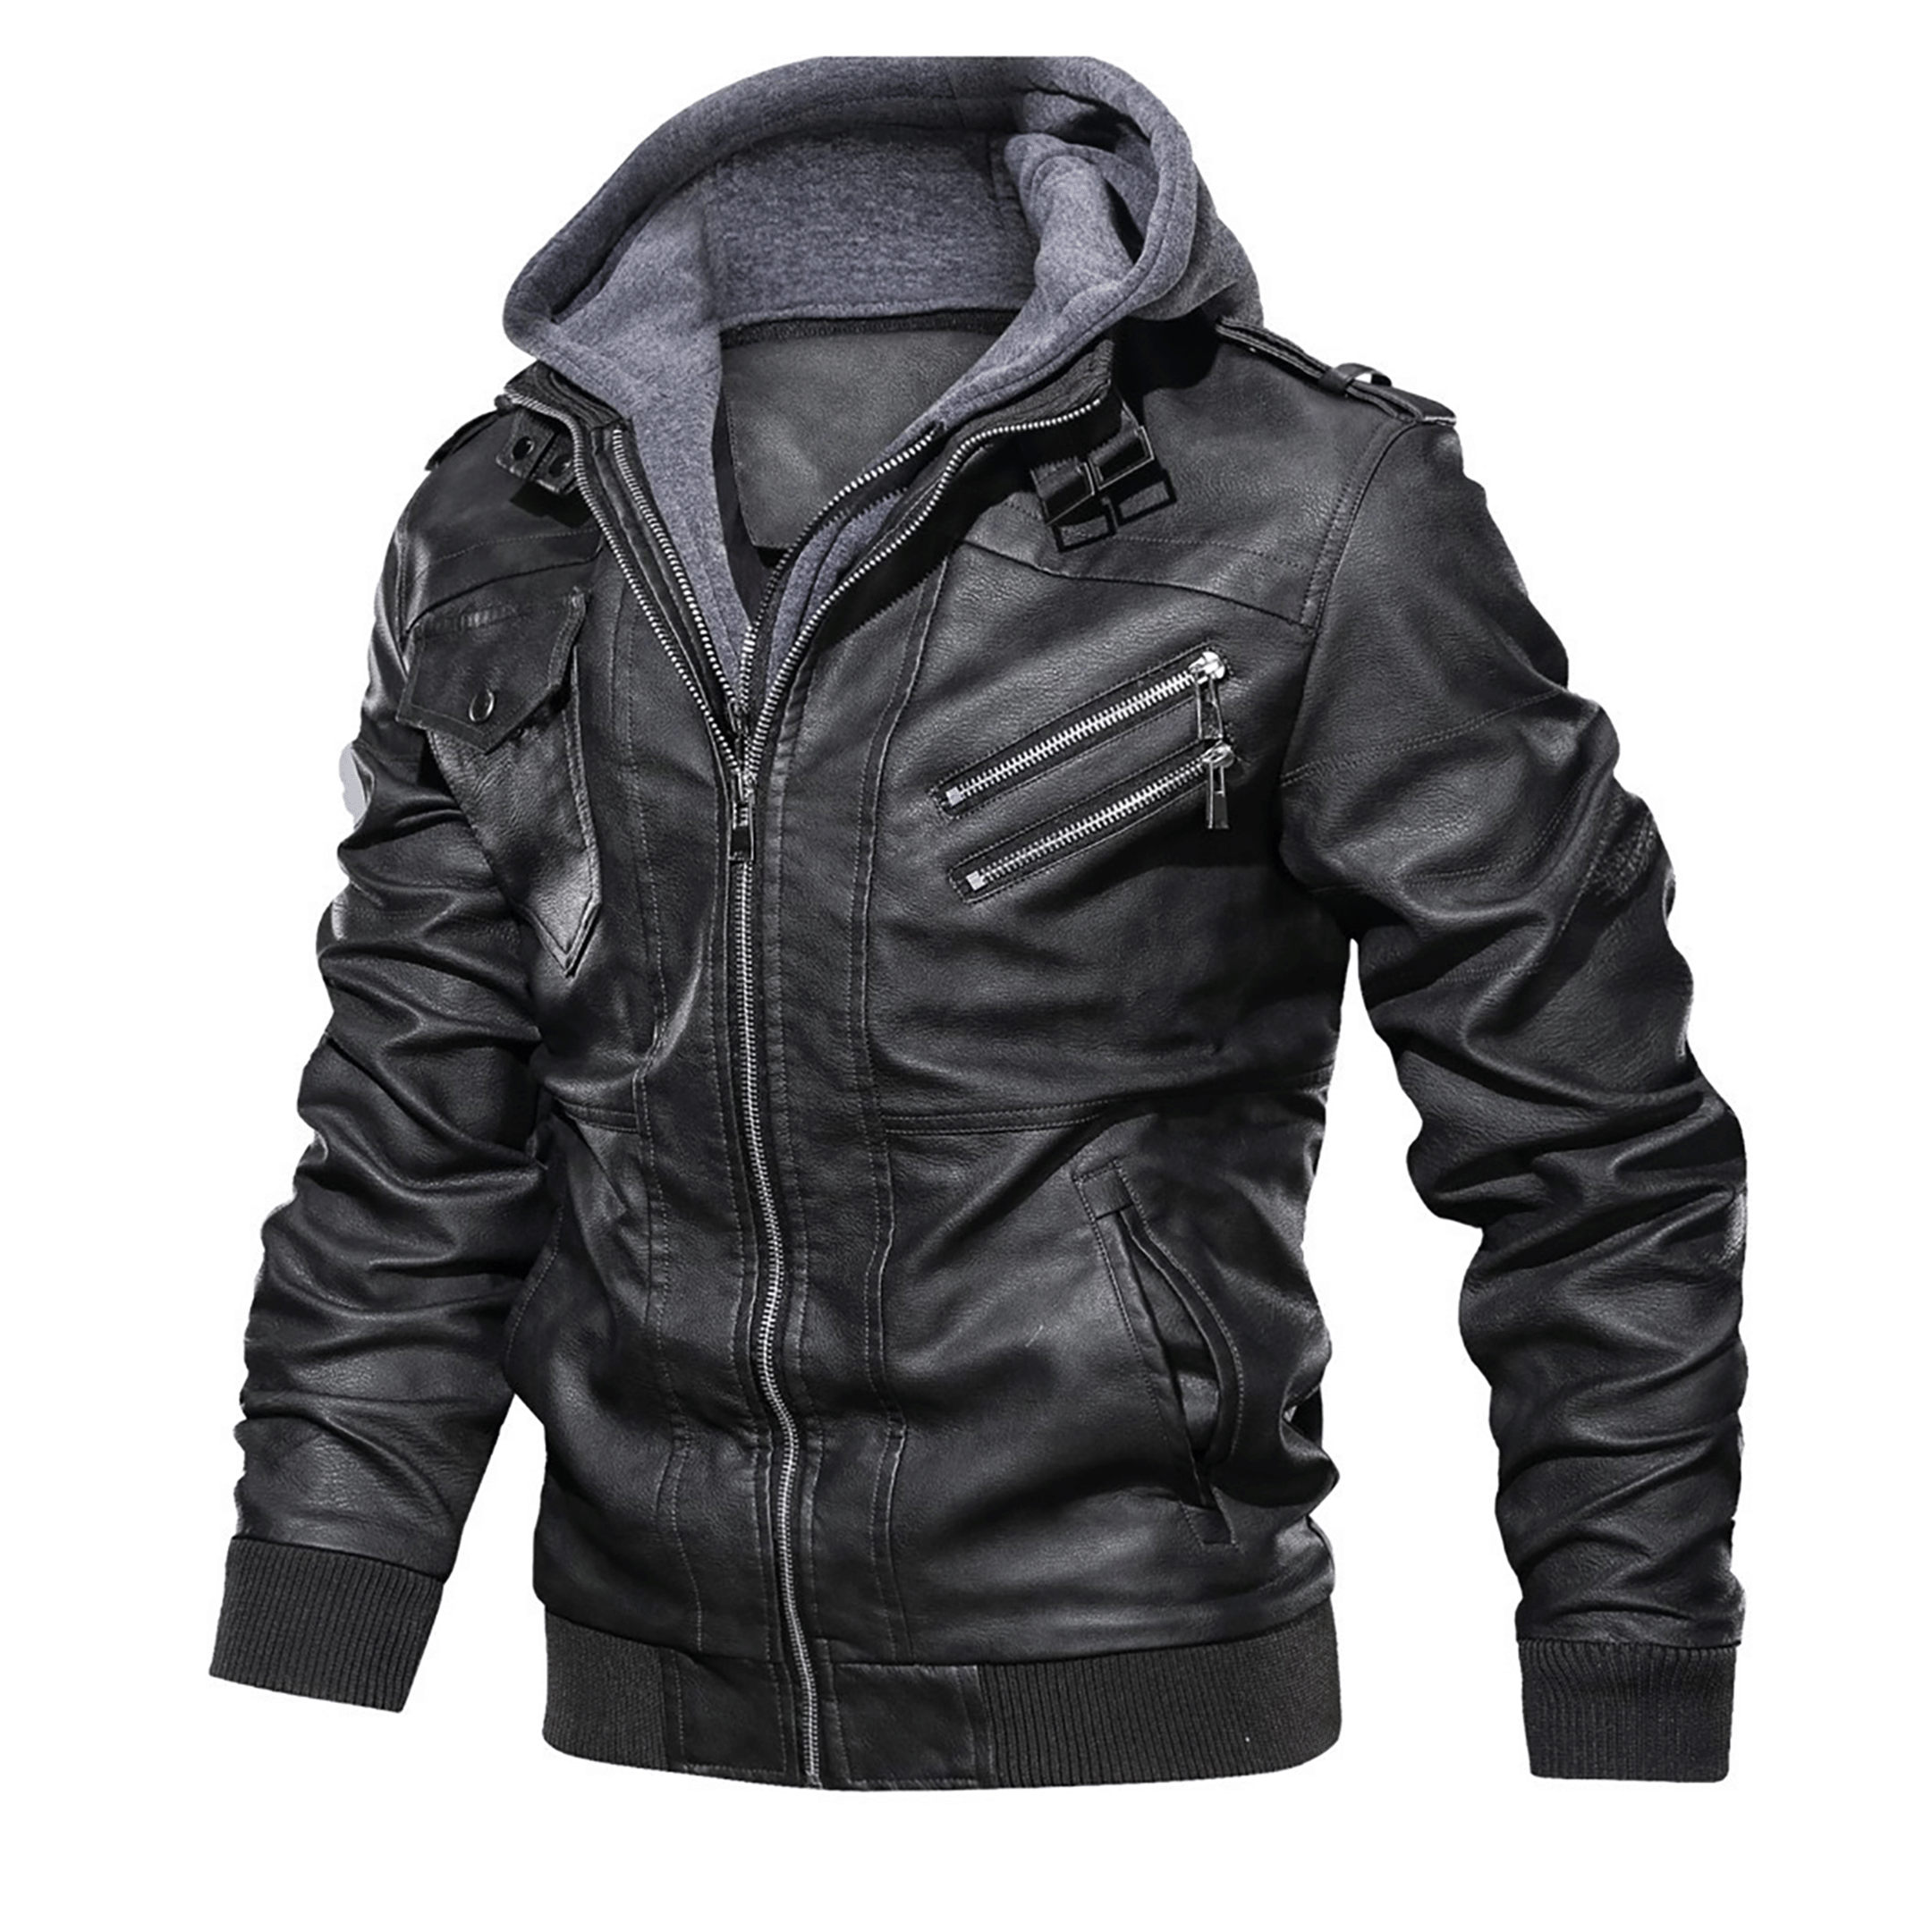 Top leather jackets and latest products 97